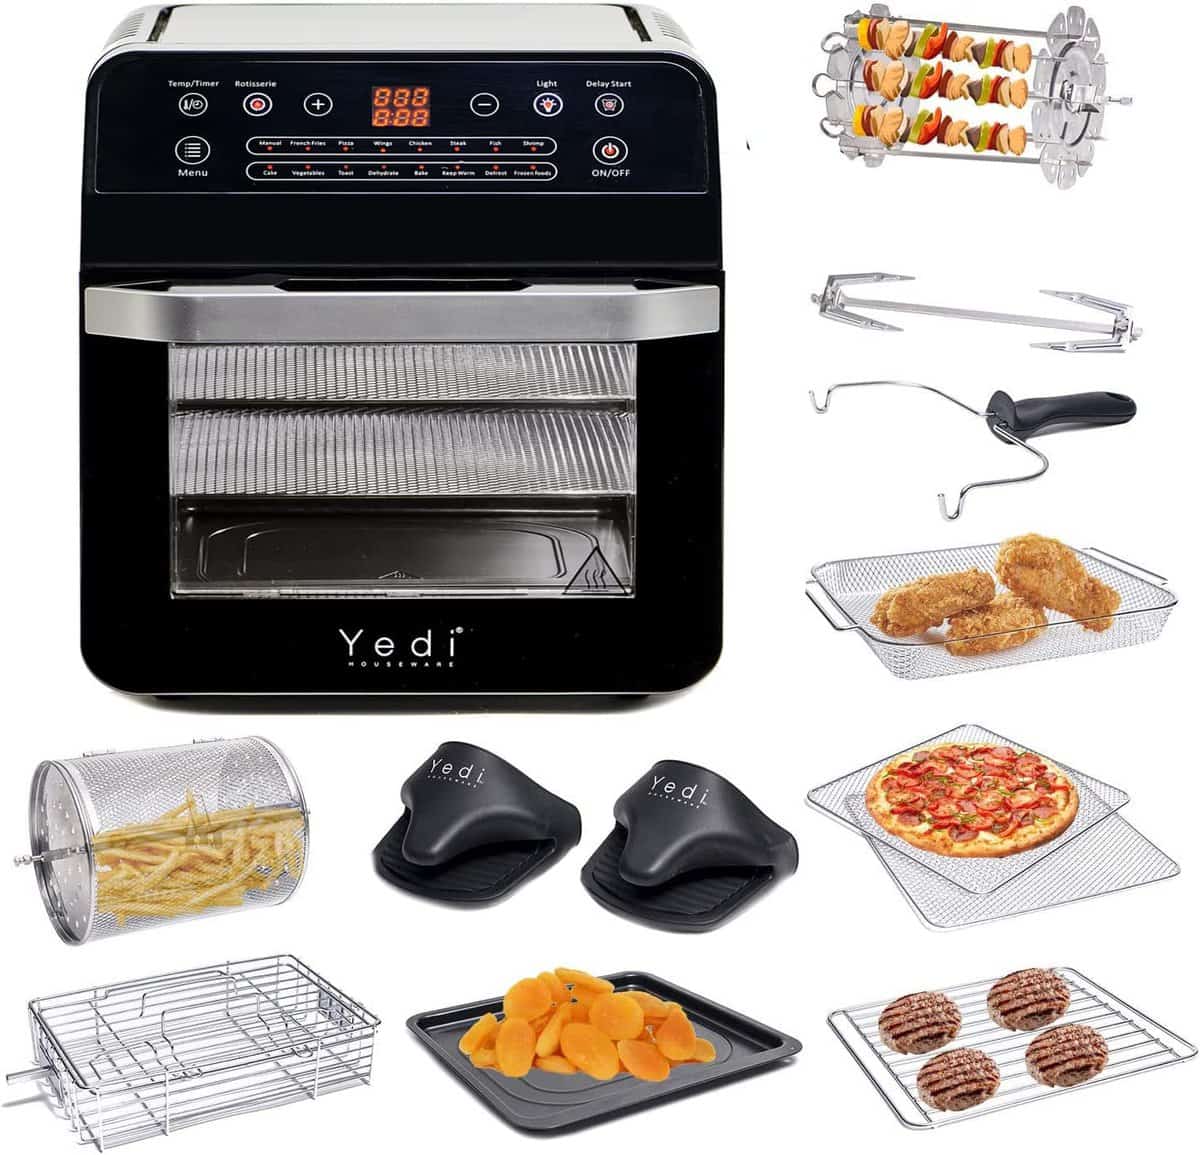 WHAT ARE THE BEST AIR FRYERS WITH DEHYDRATOR